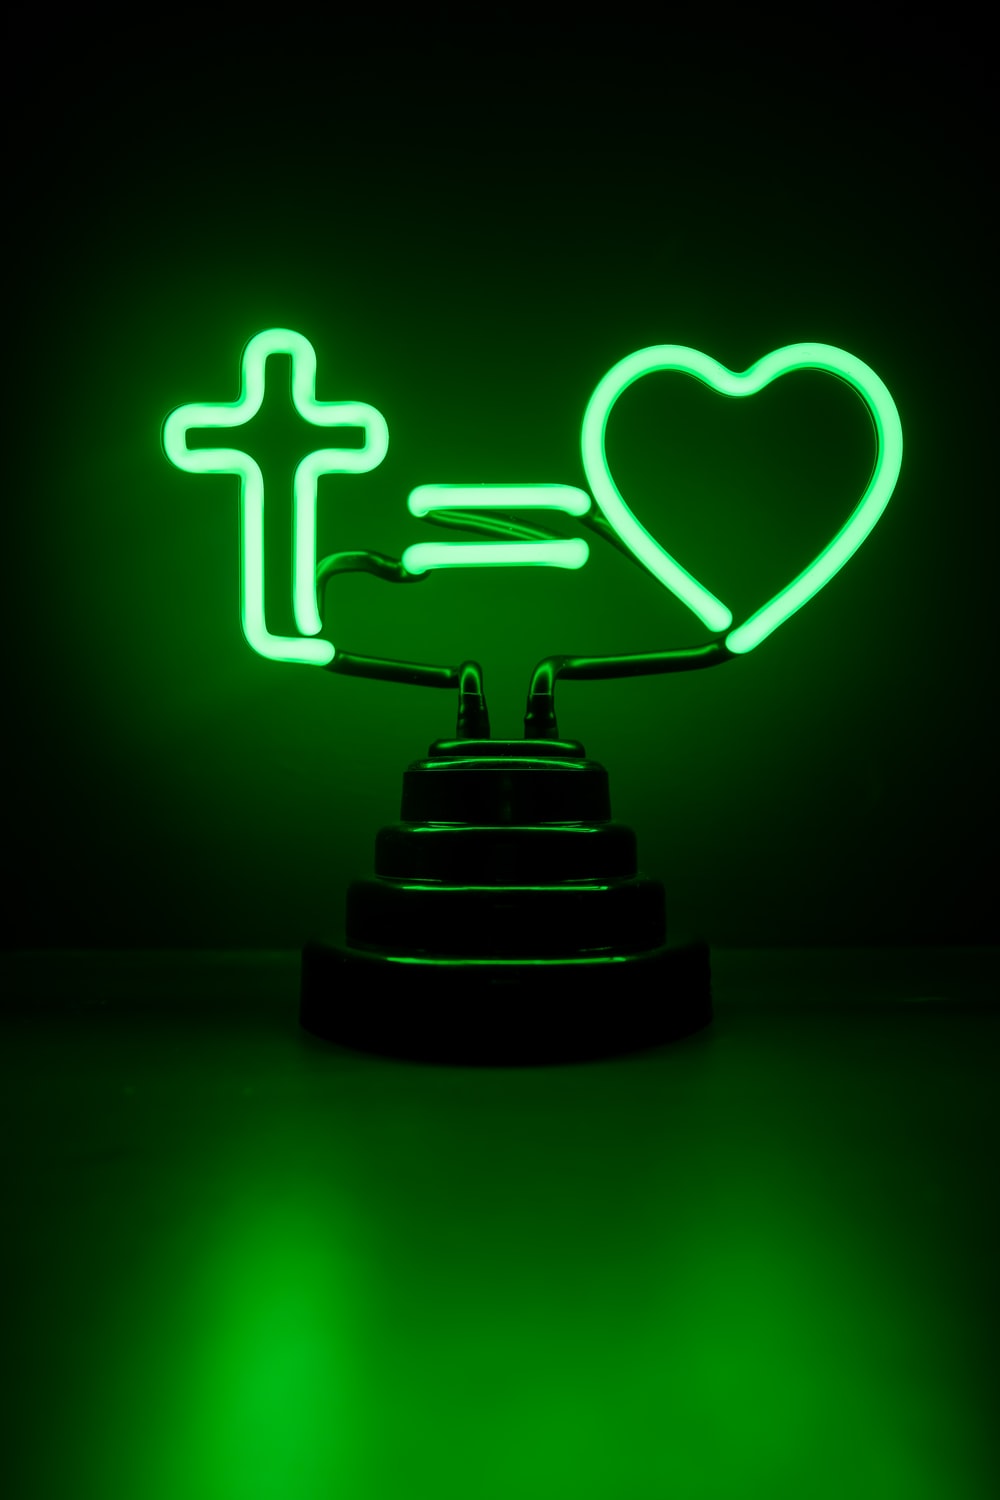 Neon Cross Picture. Download Free Image